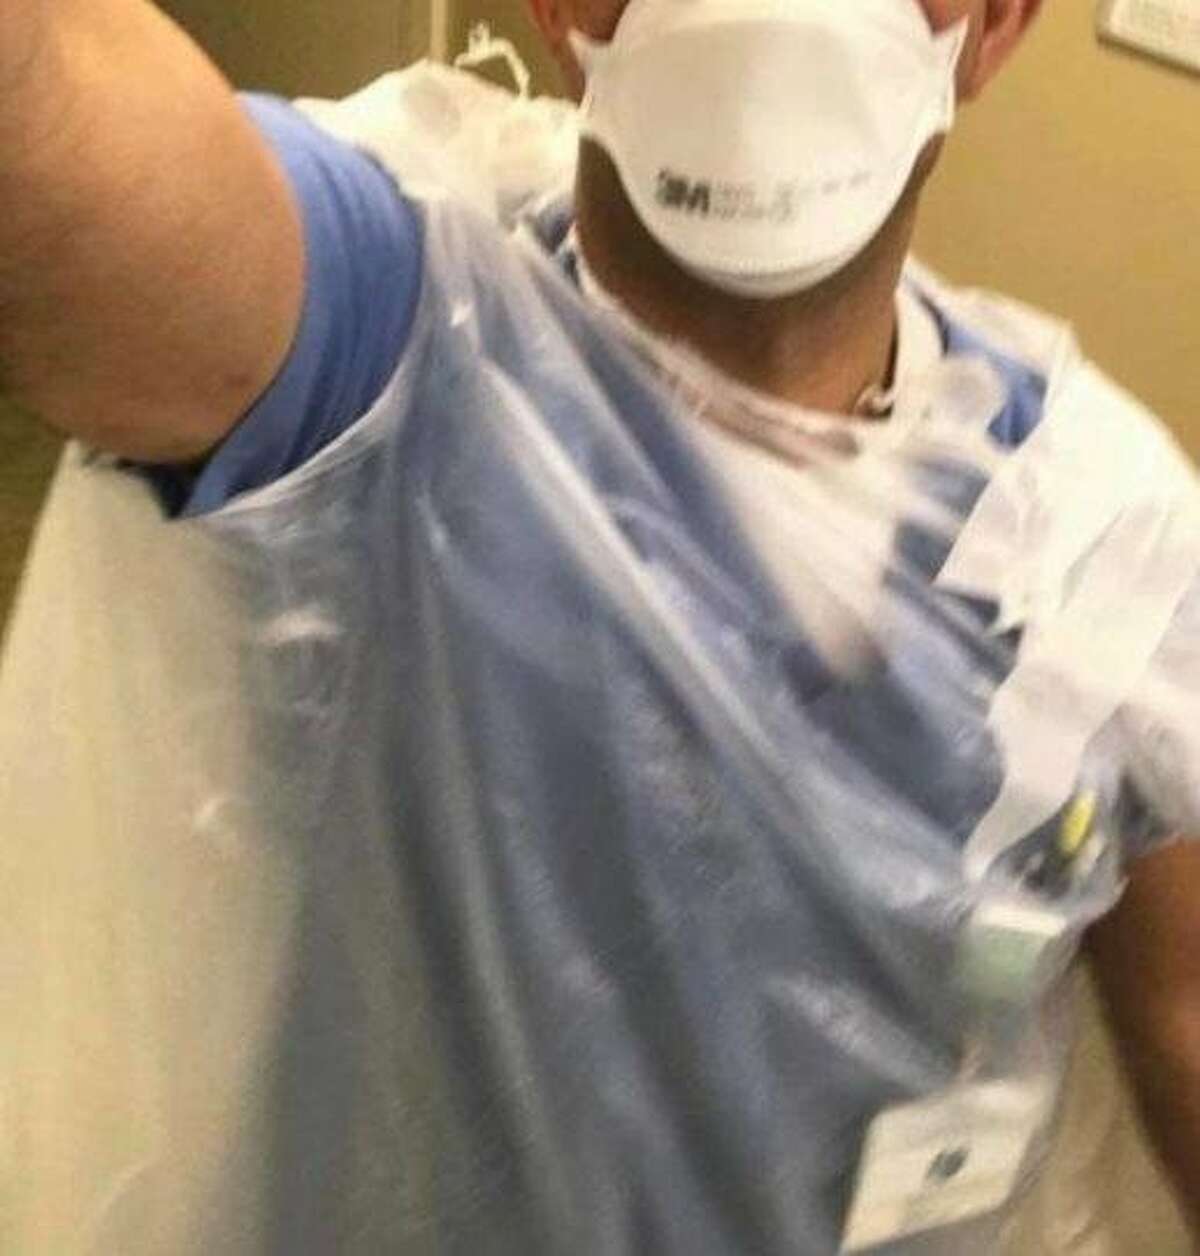 John Pearson, an emergency room nurse at Highland Hospital in Oakland, posted this photo of nurses wearing trash bags for personal protection equipment to Twitter�on March 30, 2020.